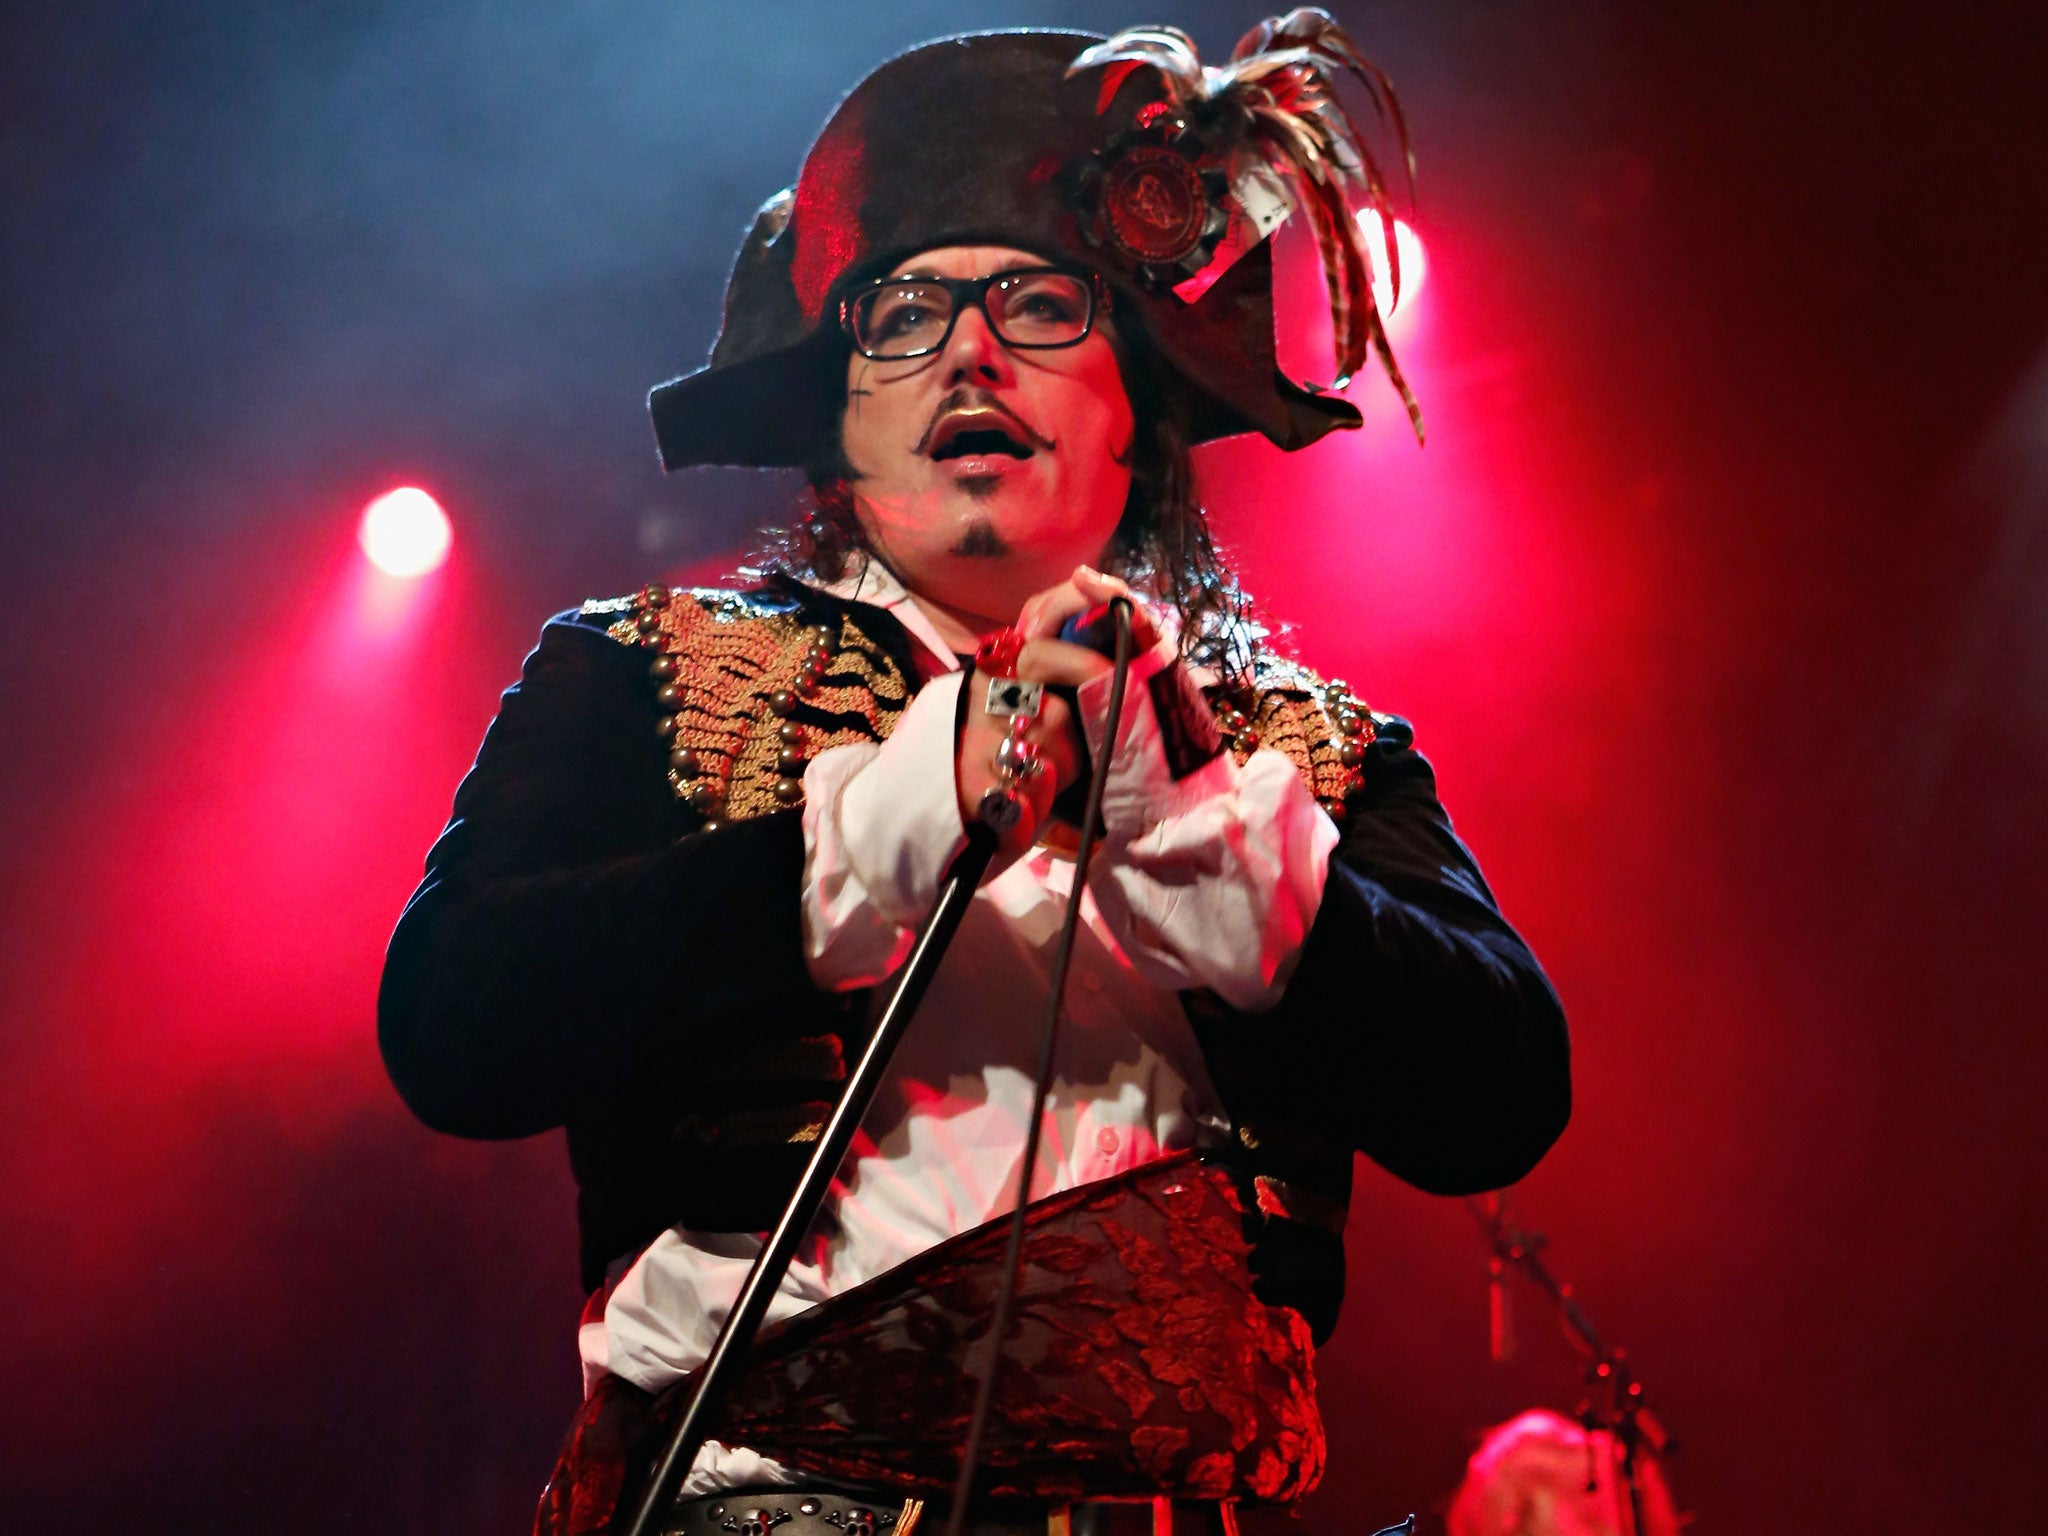 Adam Ant will release a long-awaited album in 2013